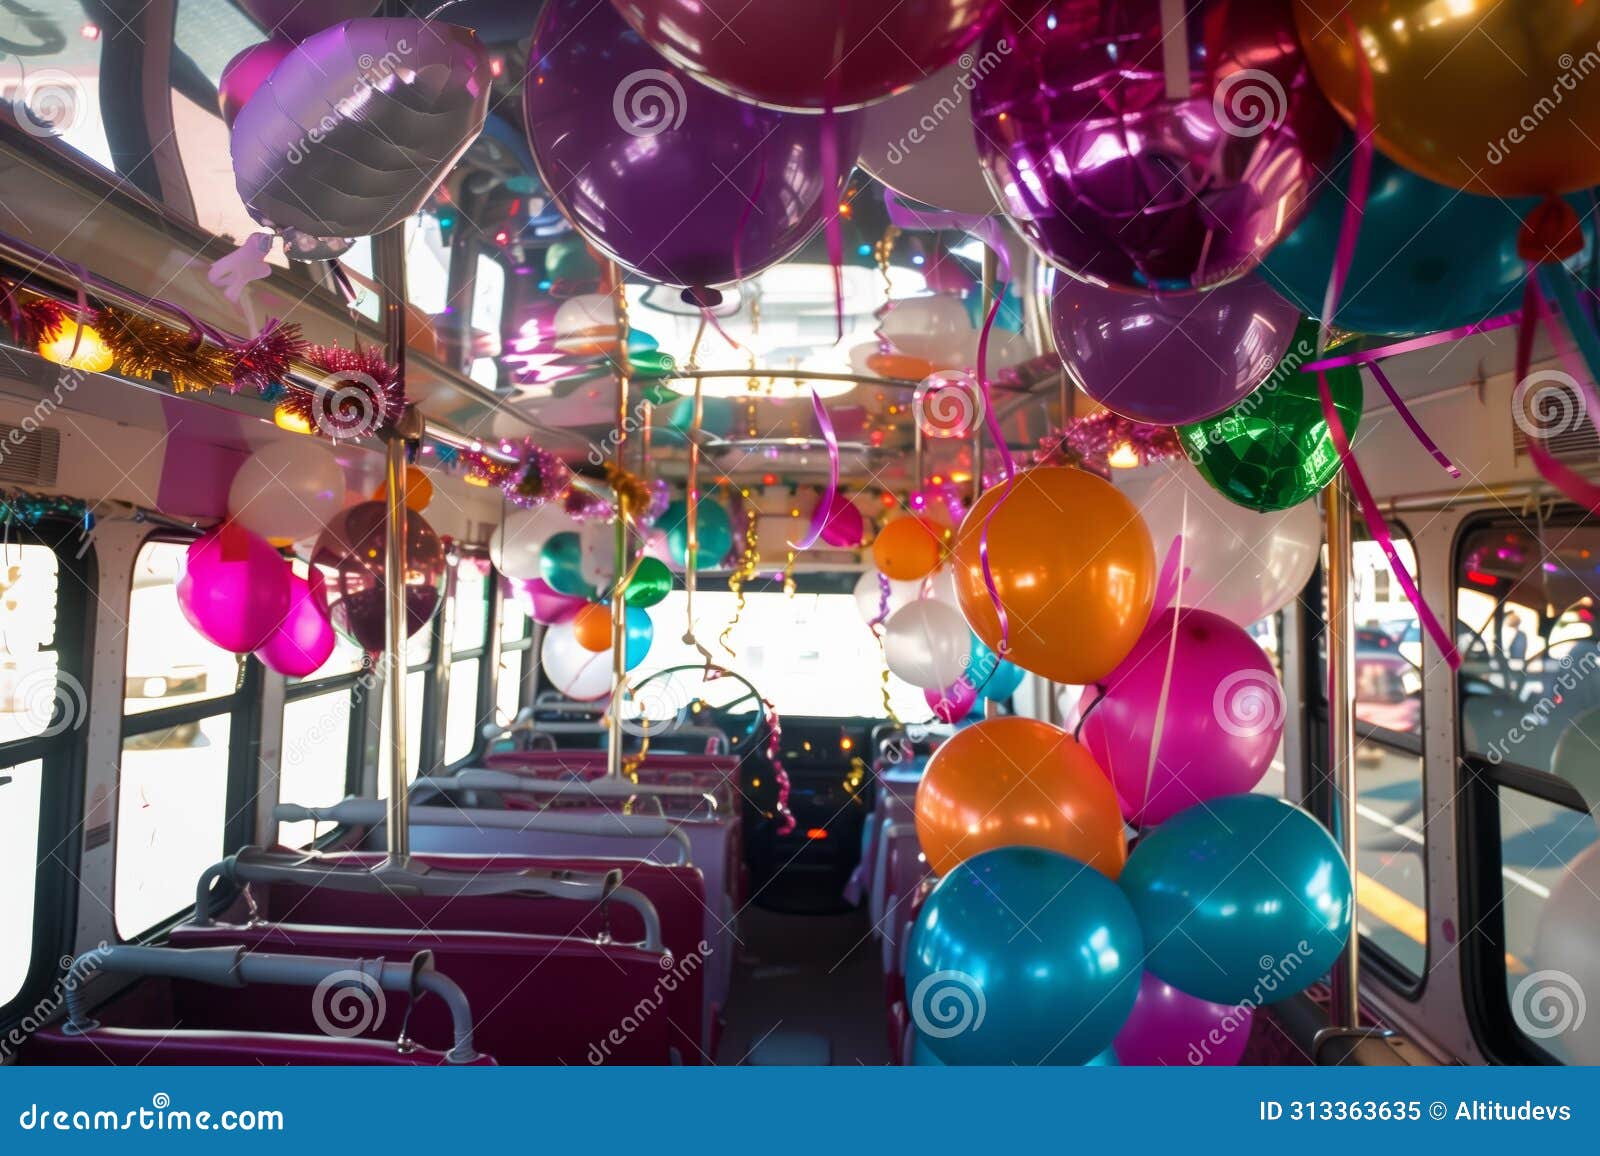 party bus interior with balloons, streamers, and revelers